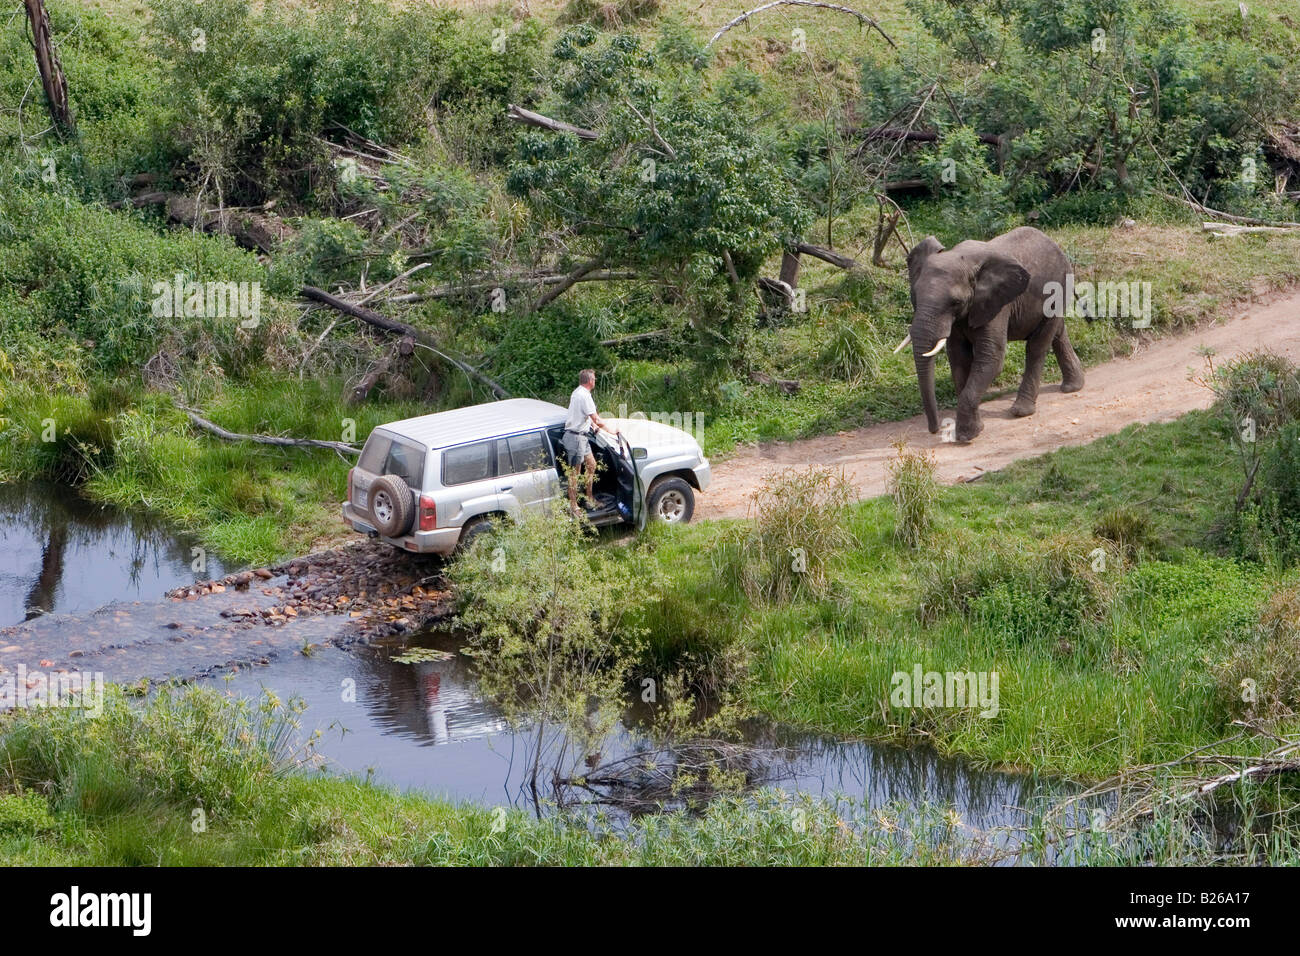 Safari through the jungle, Jeep with two elephants, an Elephant blocking the road, South Africa, Africa, mr Stock Photo